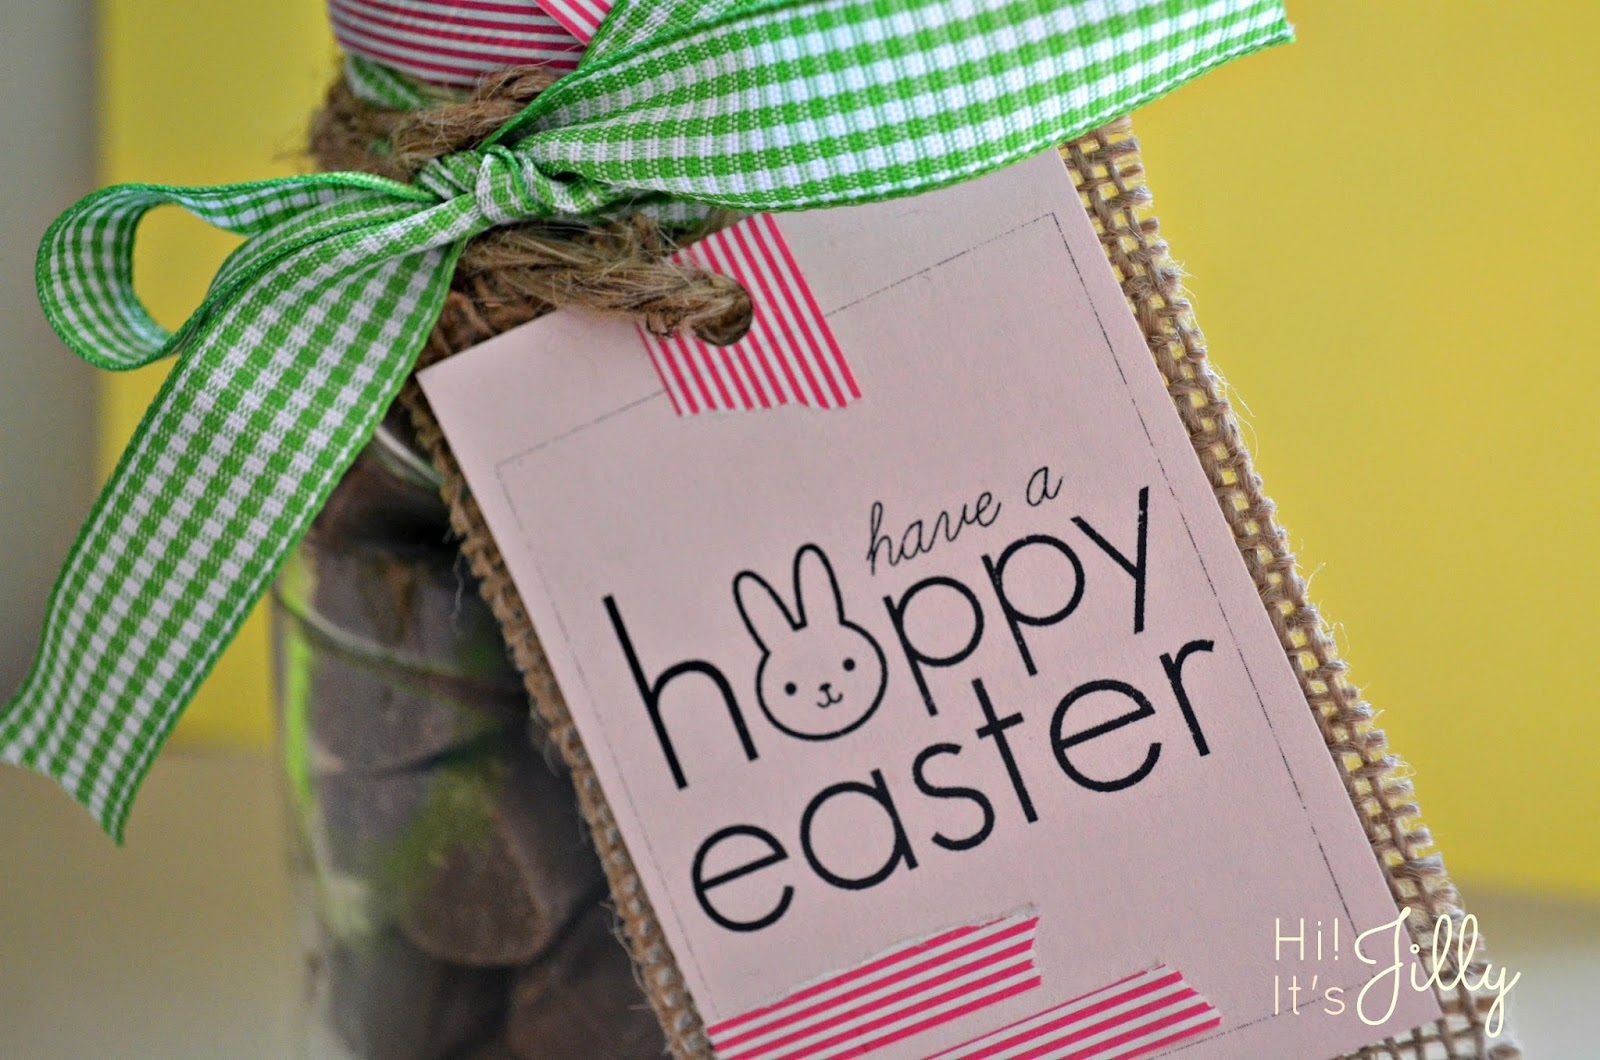 These treat jars are so darling! FREE Printable "Hoppy" Easter gift tag. #easter #gift #printable #shop #EatMoreBites